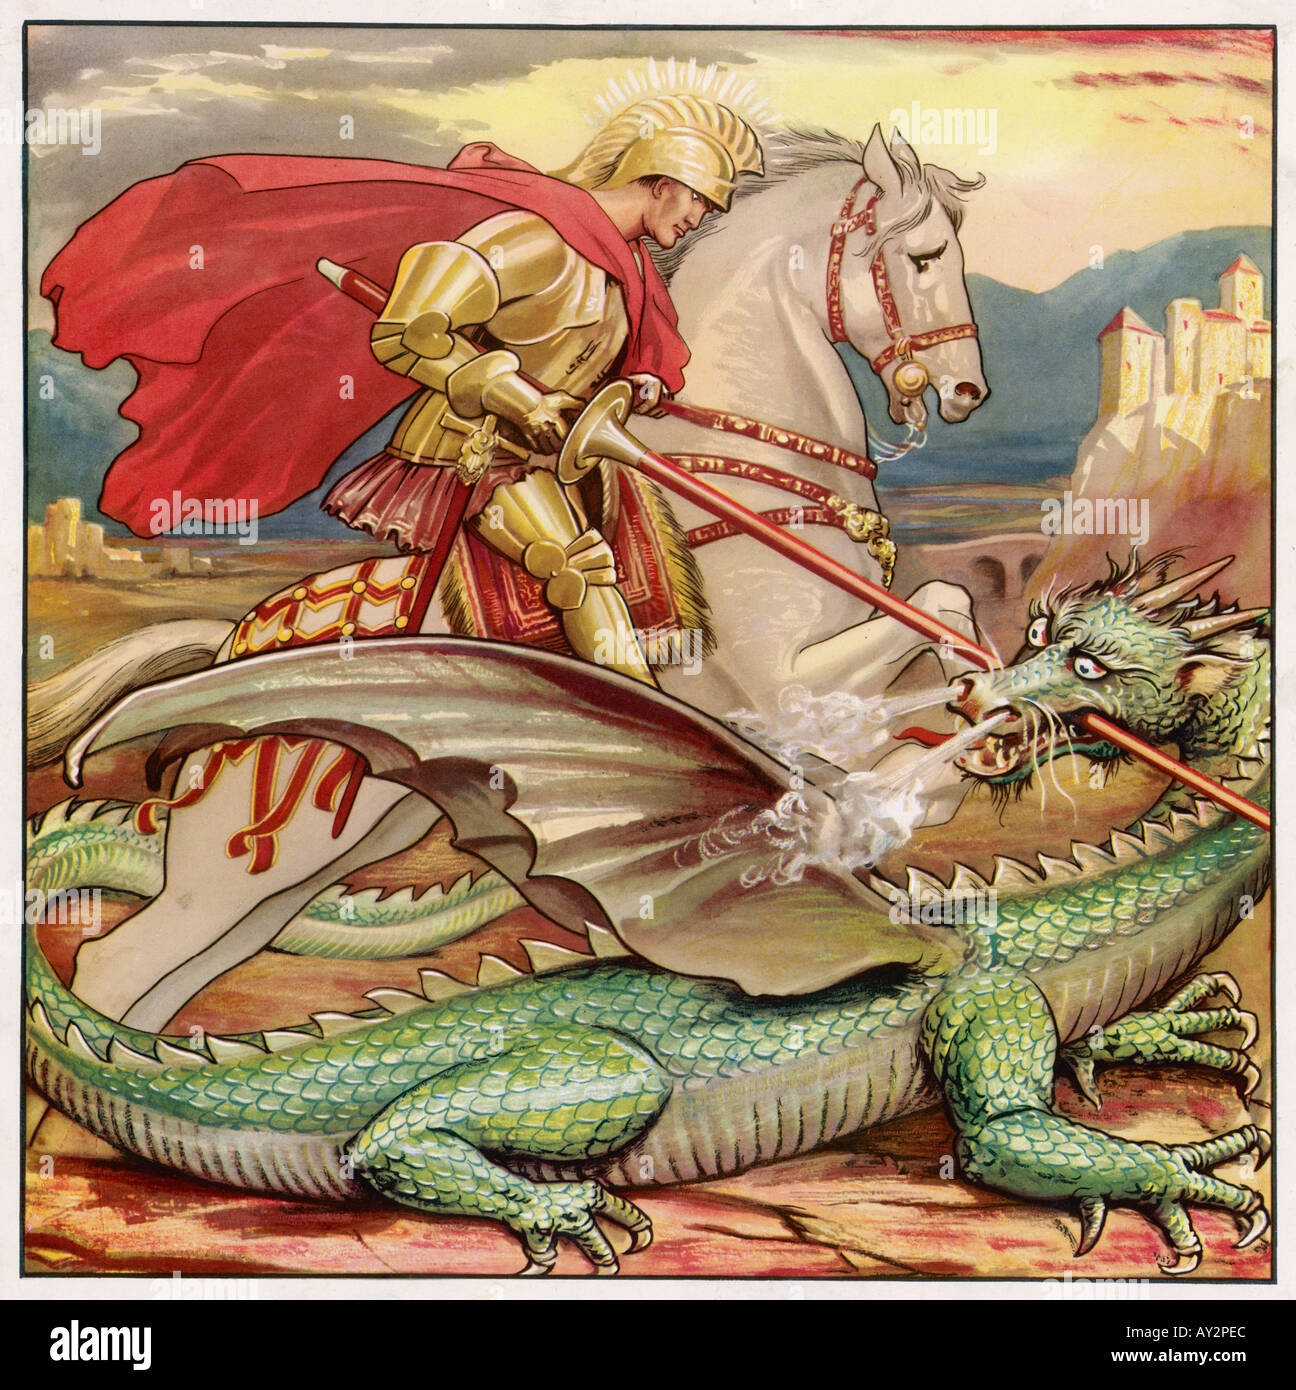 St. George and the Dragon Story Theatre Page 1